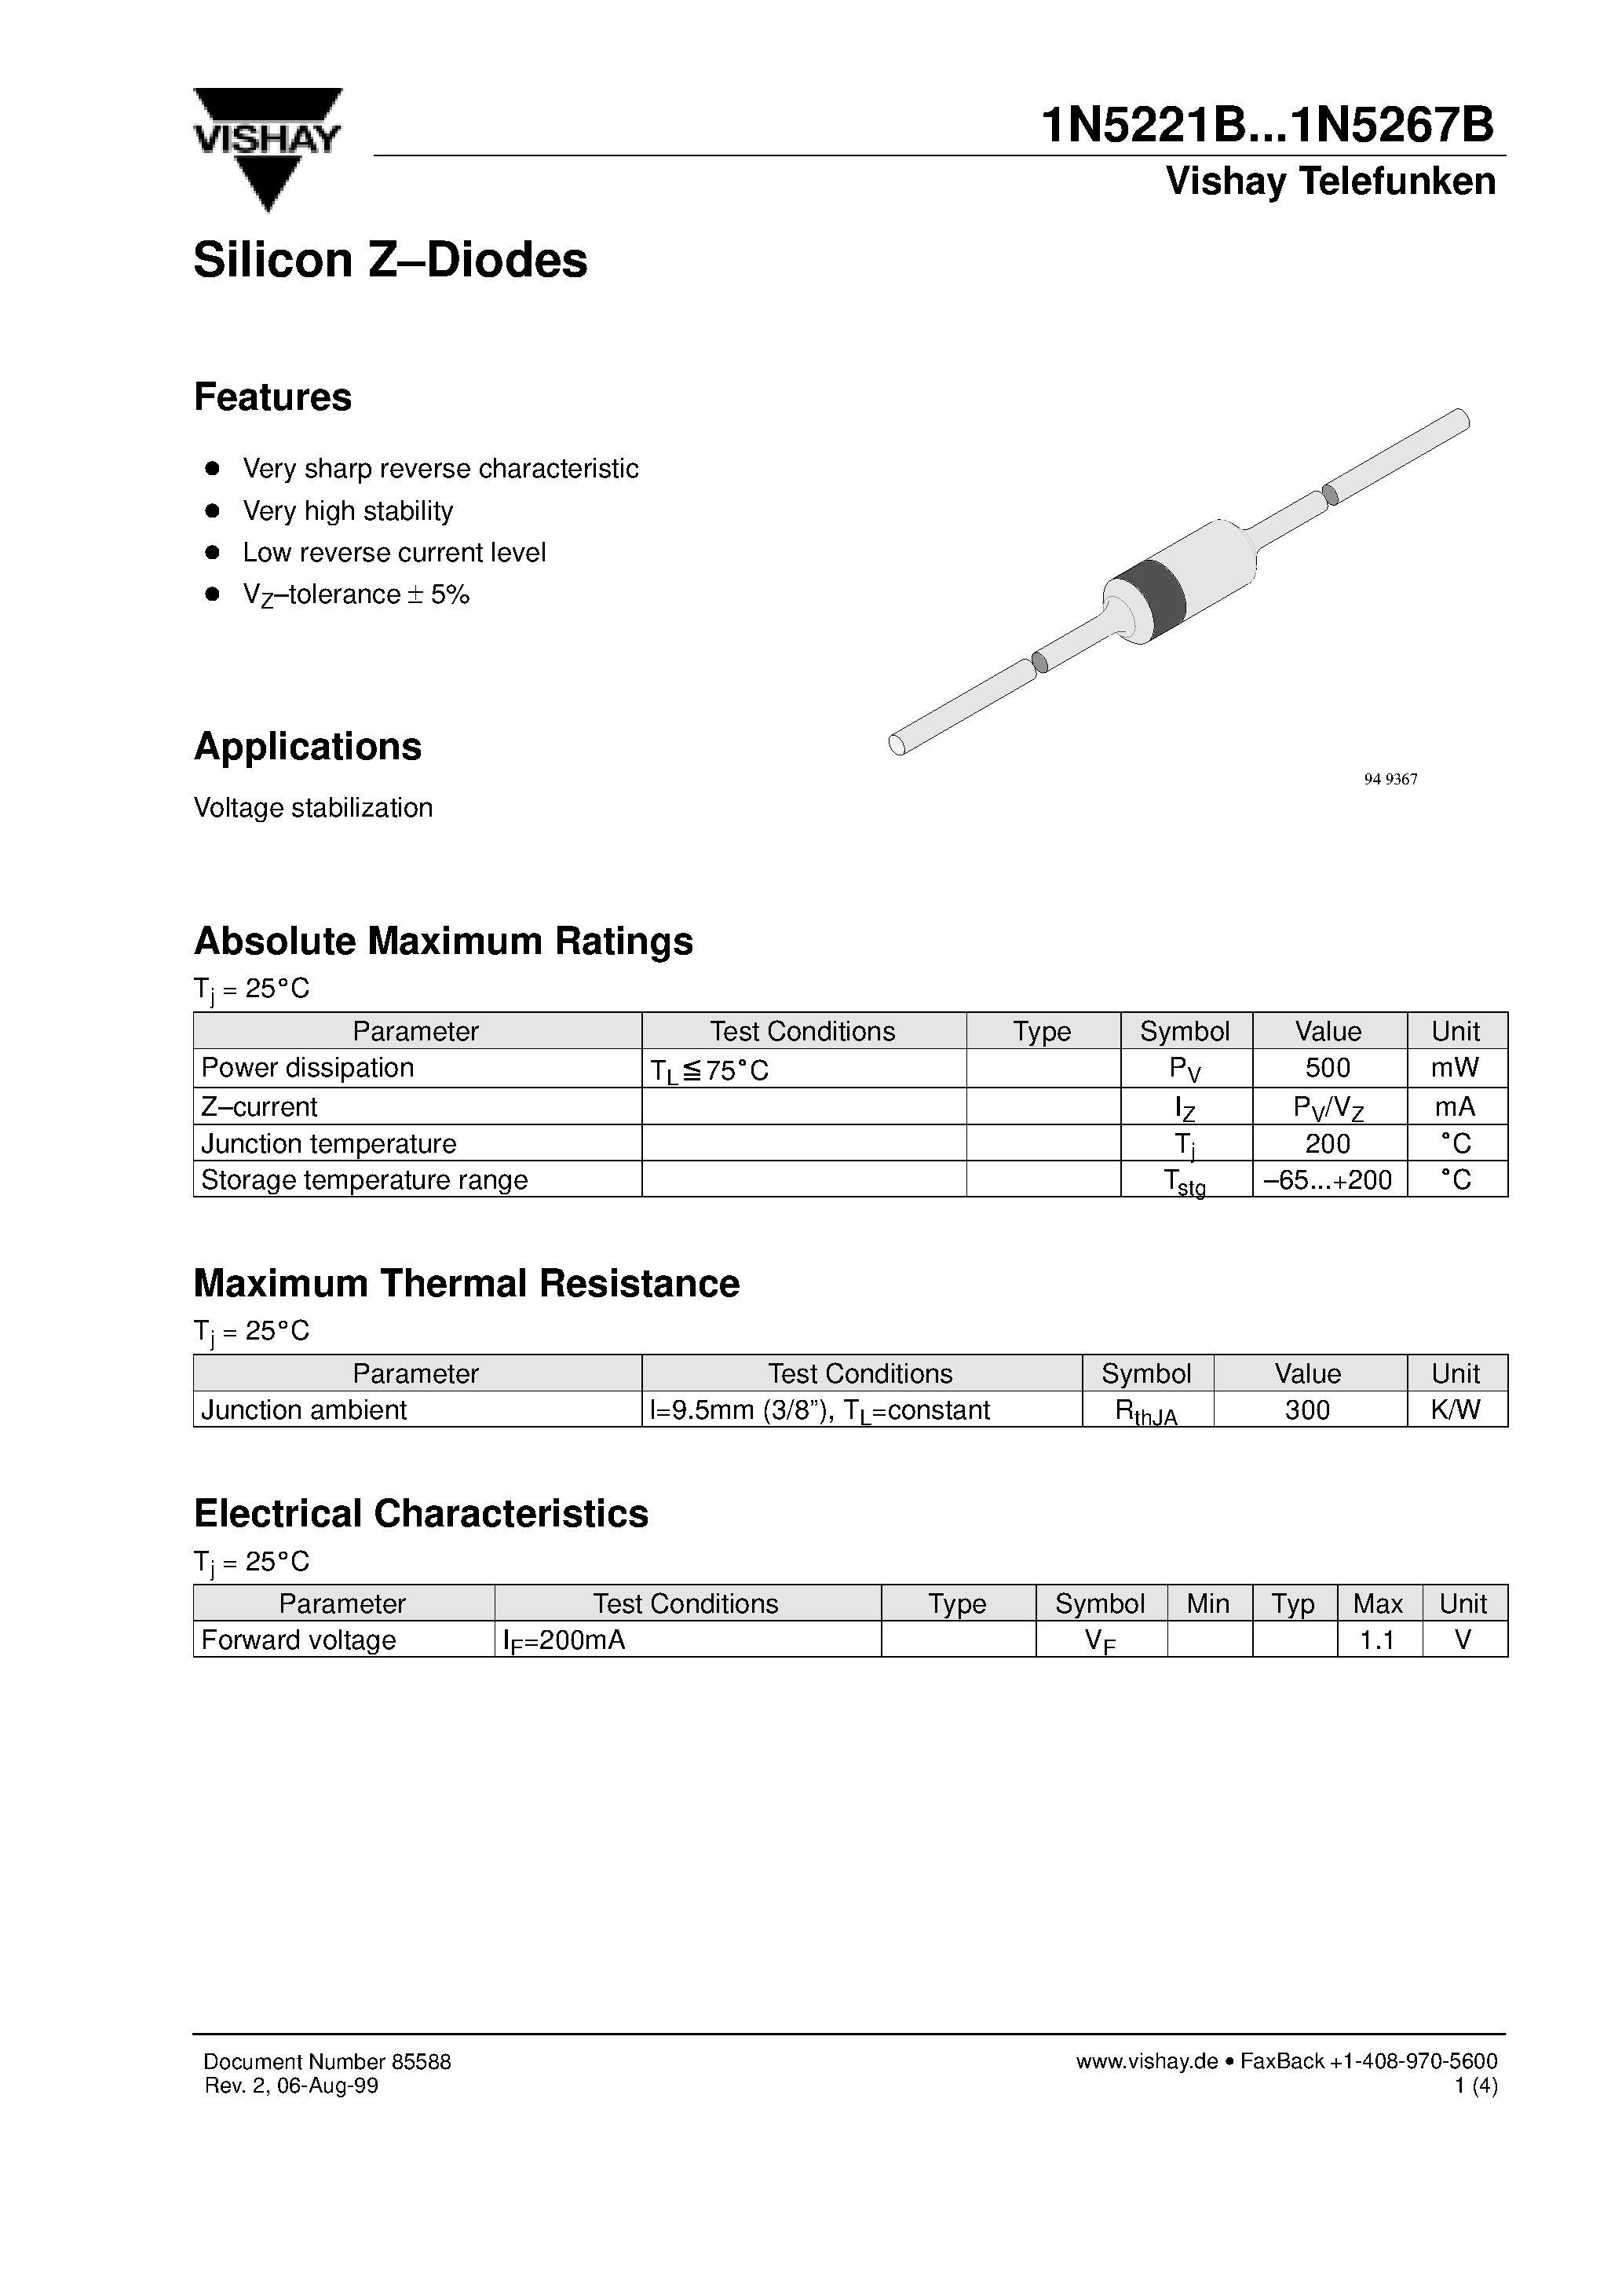 Datasheet 1N5256B - Silicon Z-Diodes page 1